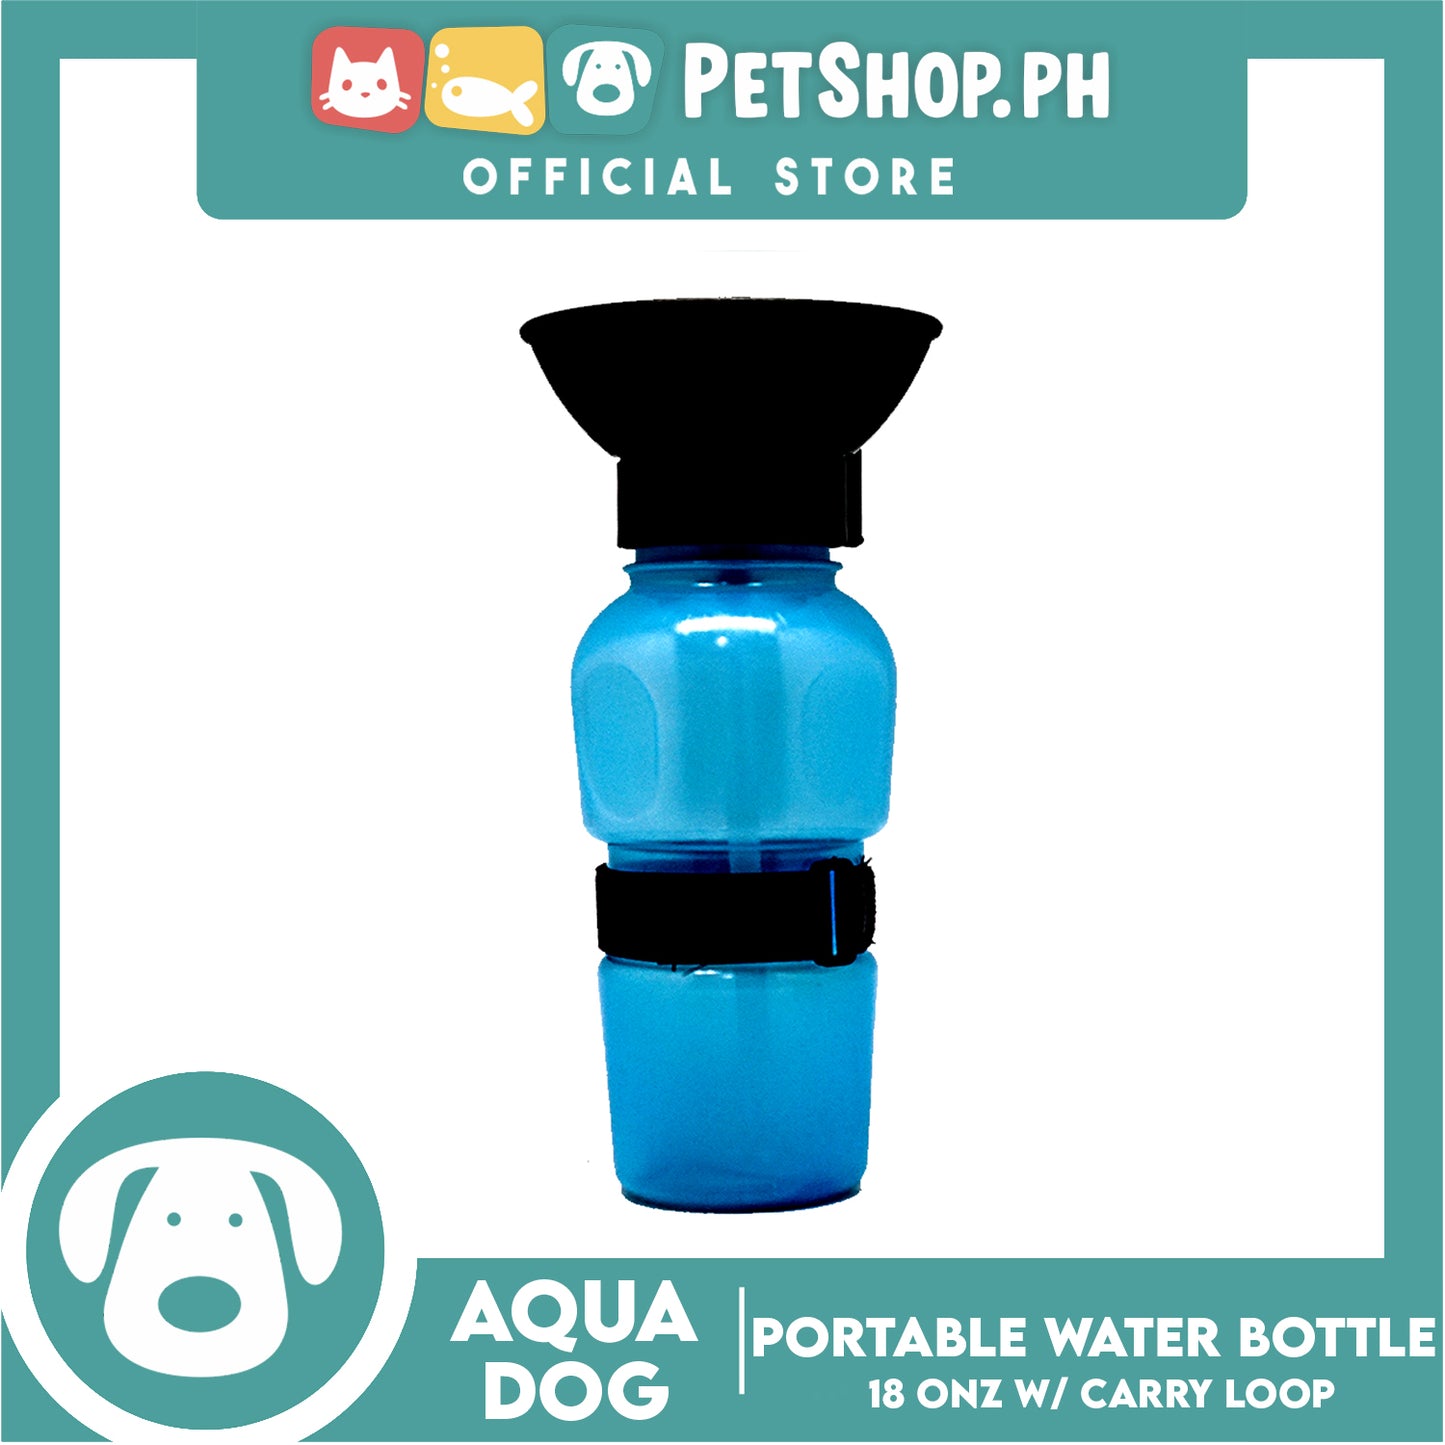 Aqua Dog Portable Pet Water Bottle 18oz with Carry Loop